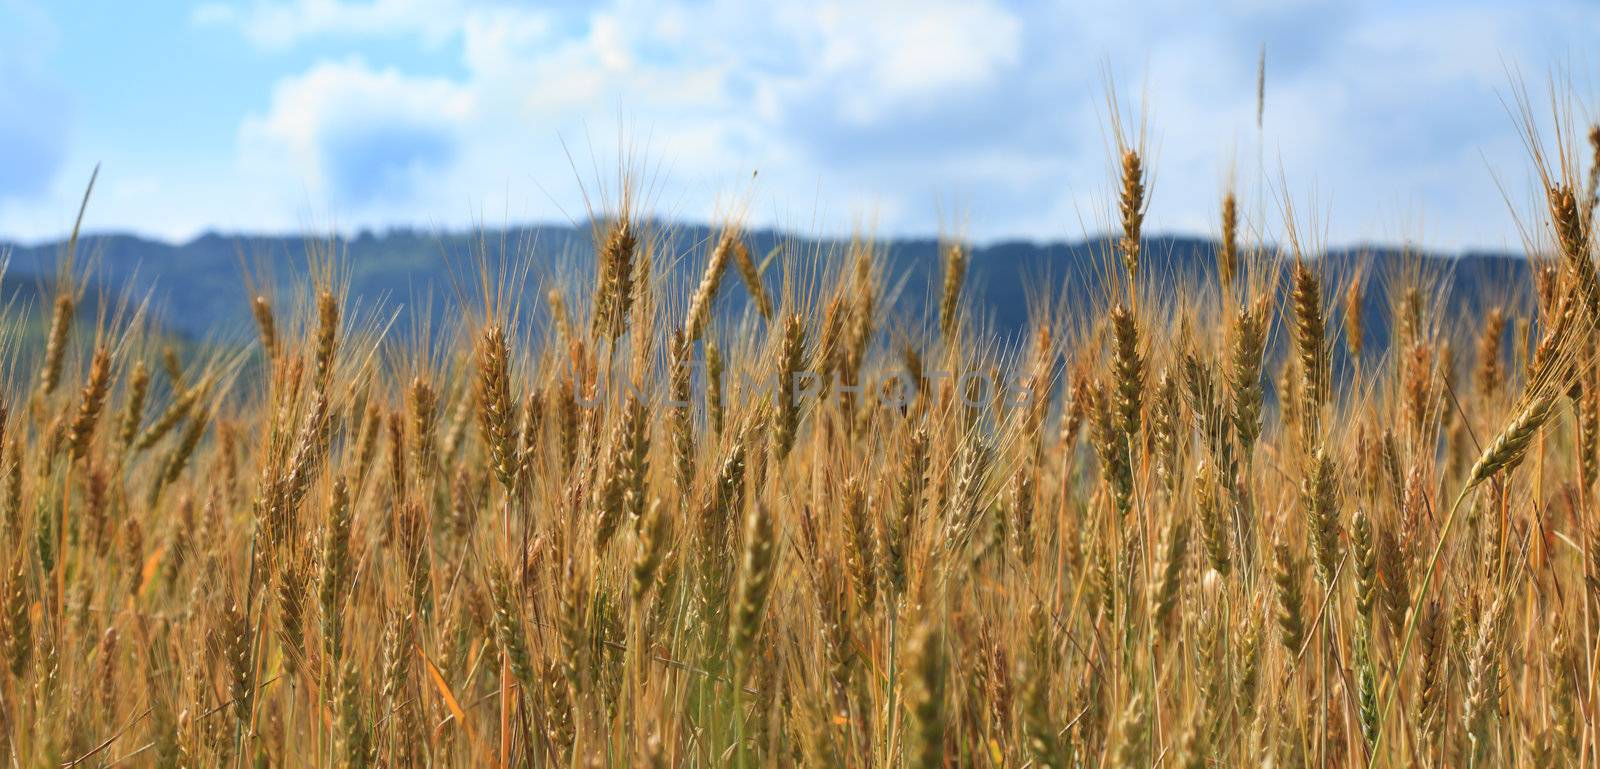 Image of a cereals field in a hot sunny summer day.